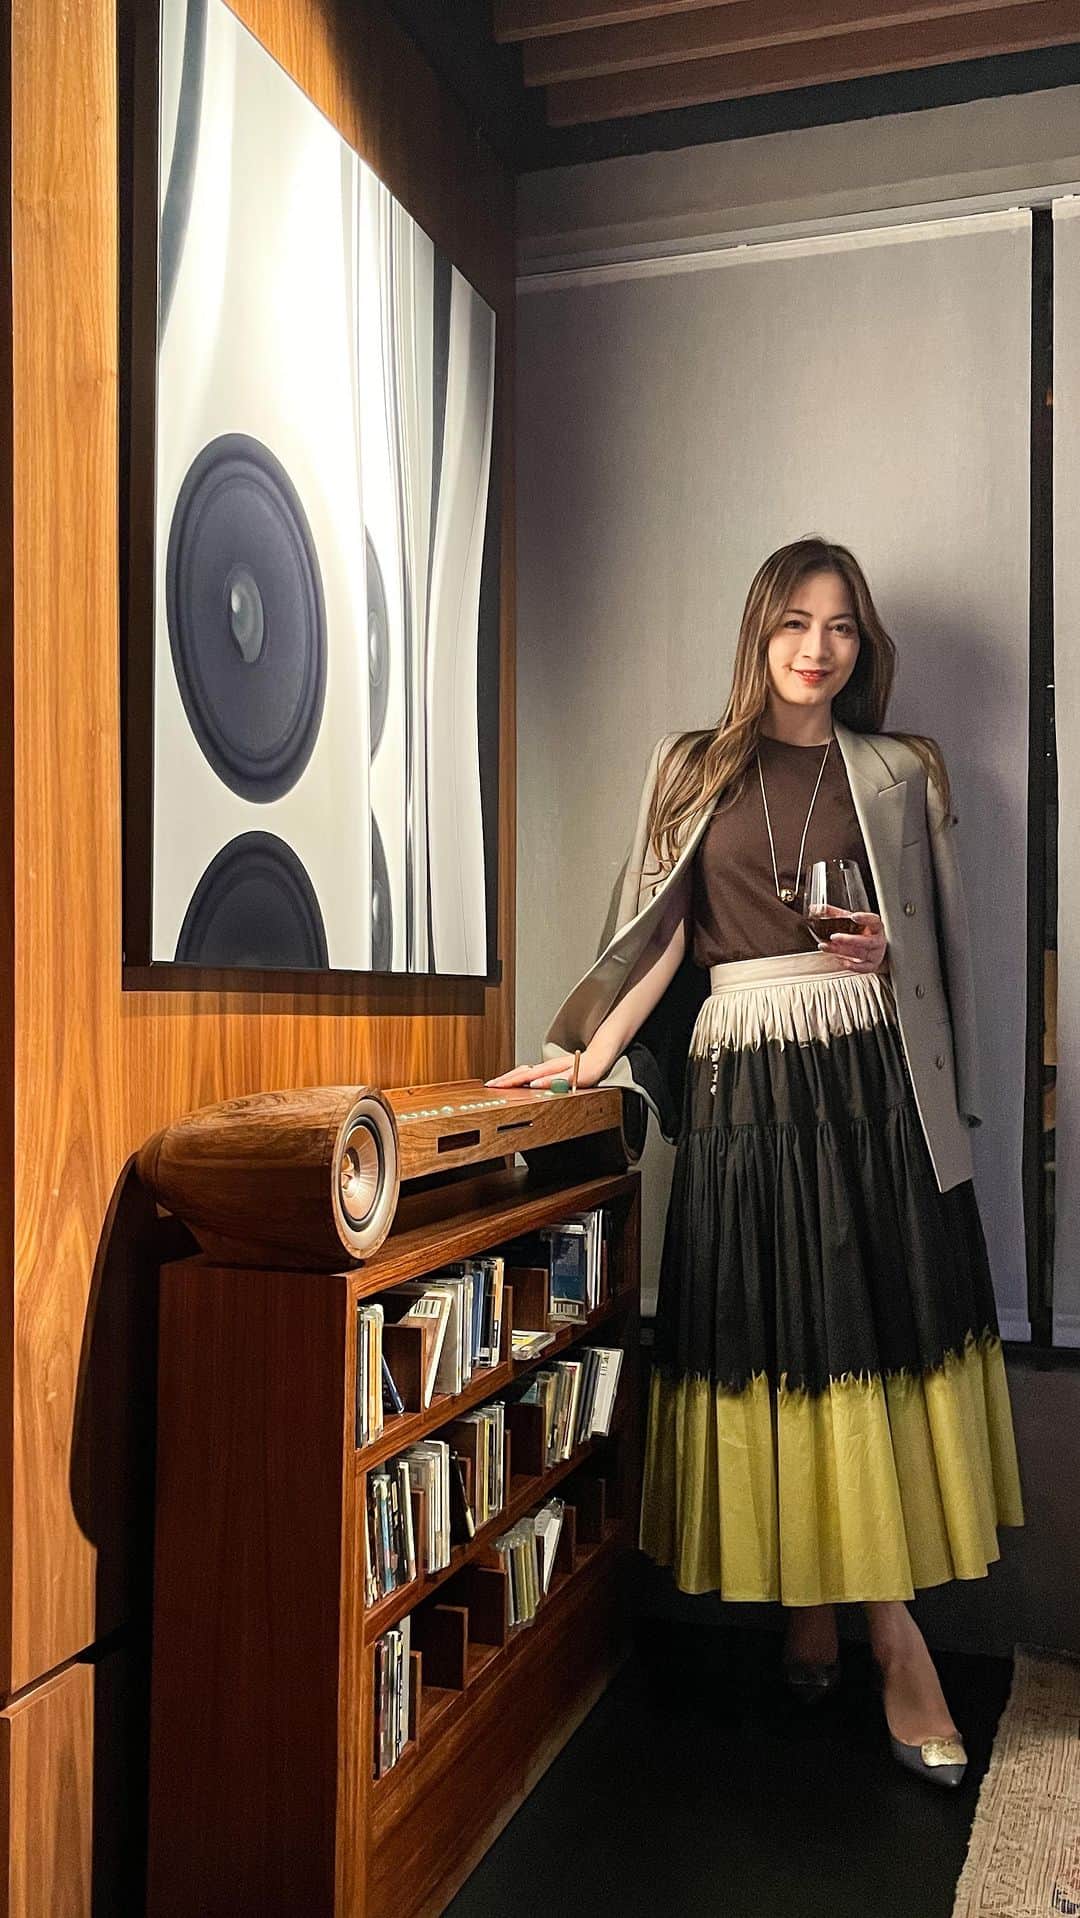 Ruby Kwanのインスタグラム：「To discover the sound of breath with the wellness journey companion. @kef.hongkong x @yourshroommate 💚 #rougeclosetlifestyle   #kef #kefhk #shroommate #yourshroommate #rubykwan  Outfit: #bottegaveneta top | #saintlaurent blazer & necklace | #prada skirt | #sauvereign shoes | #personalstyleblogger」